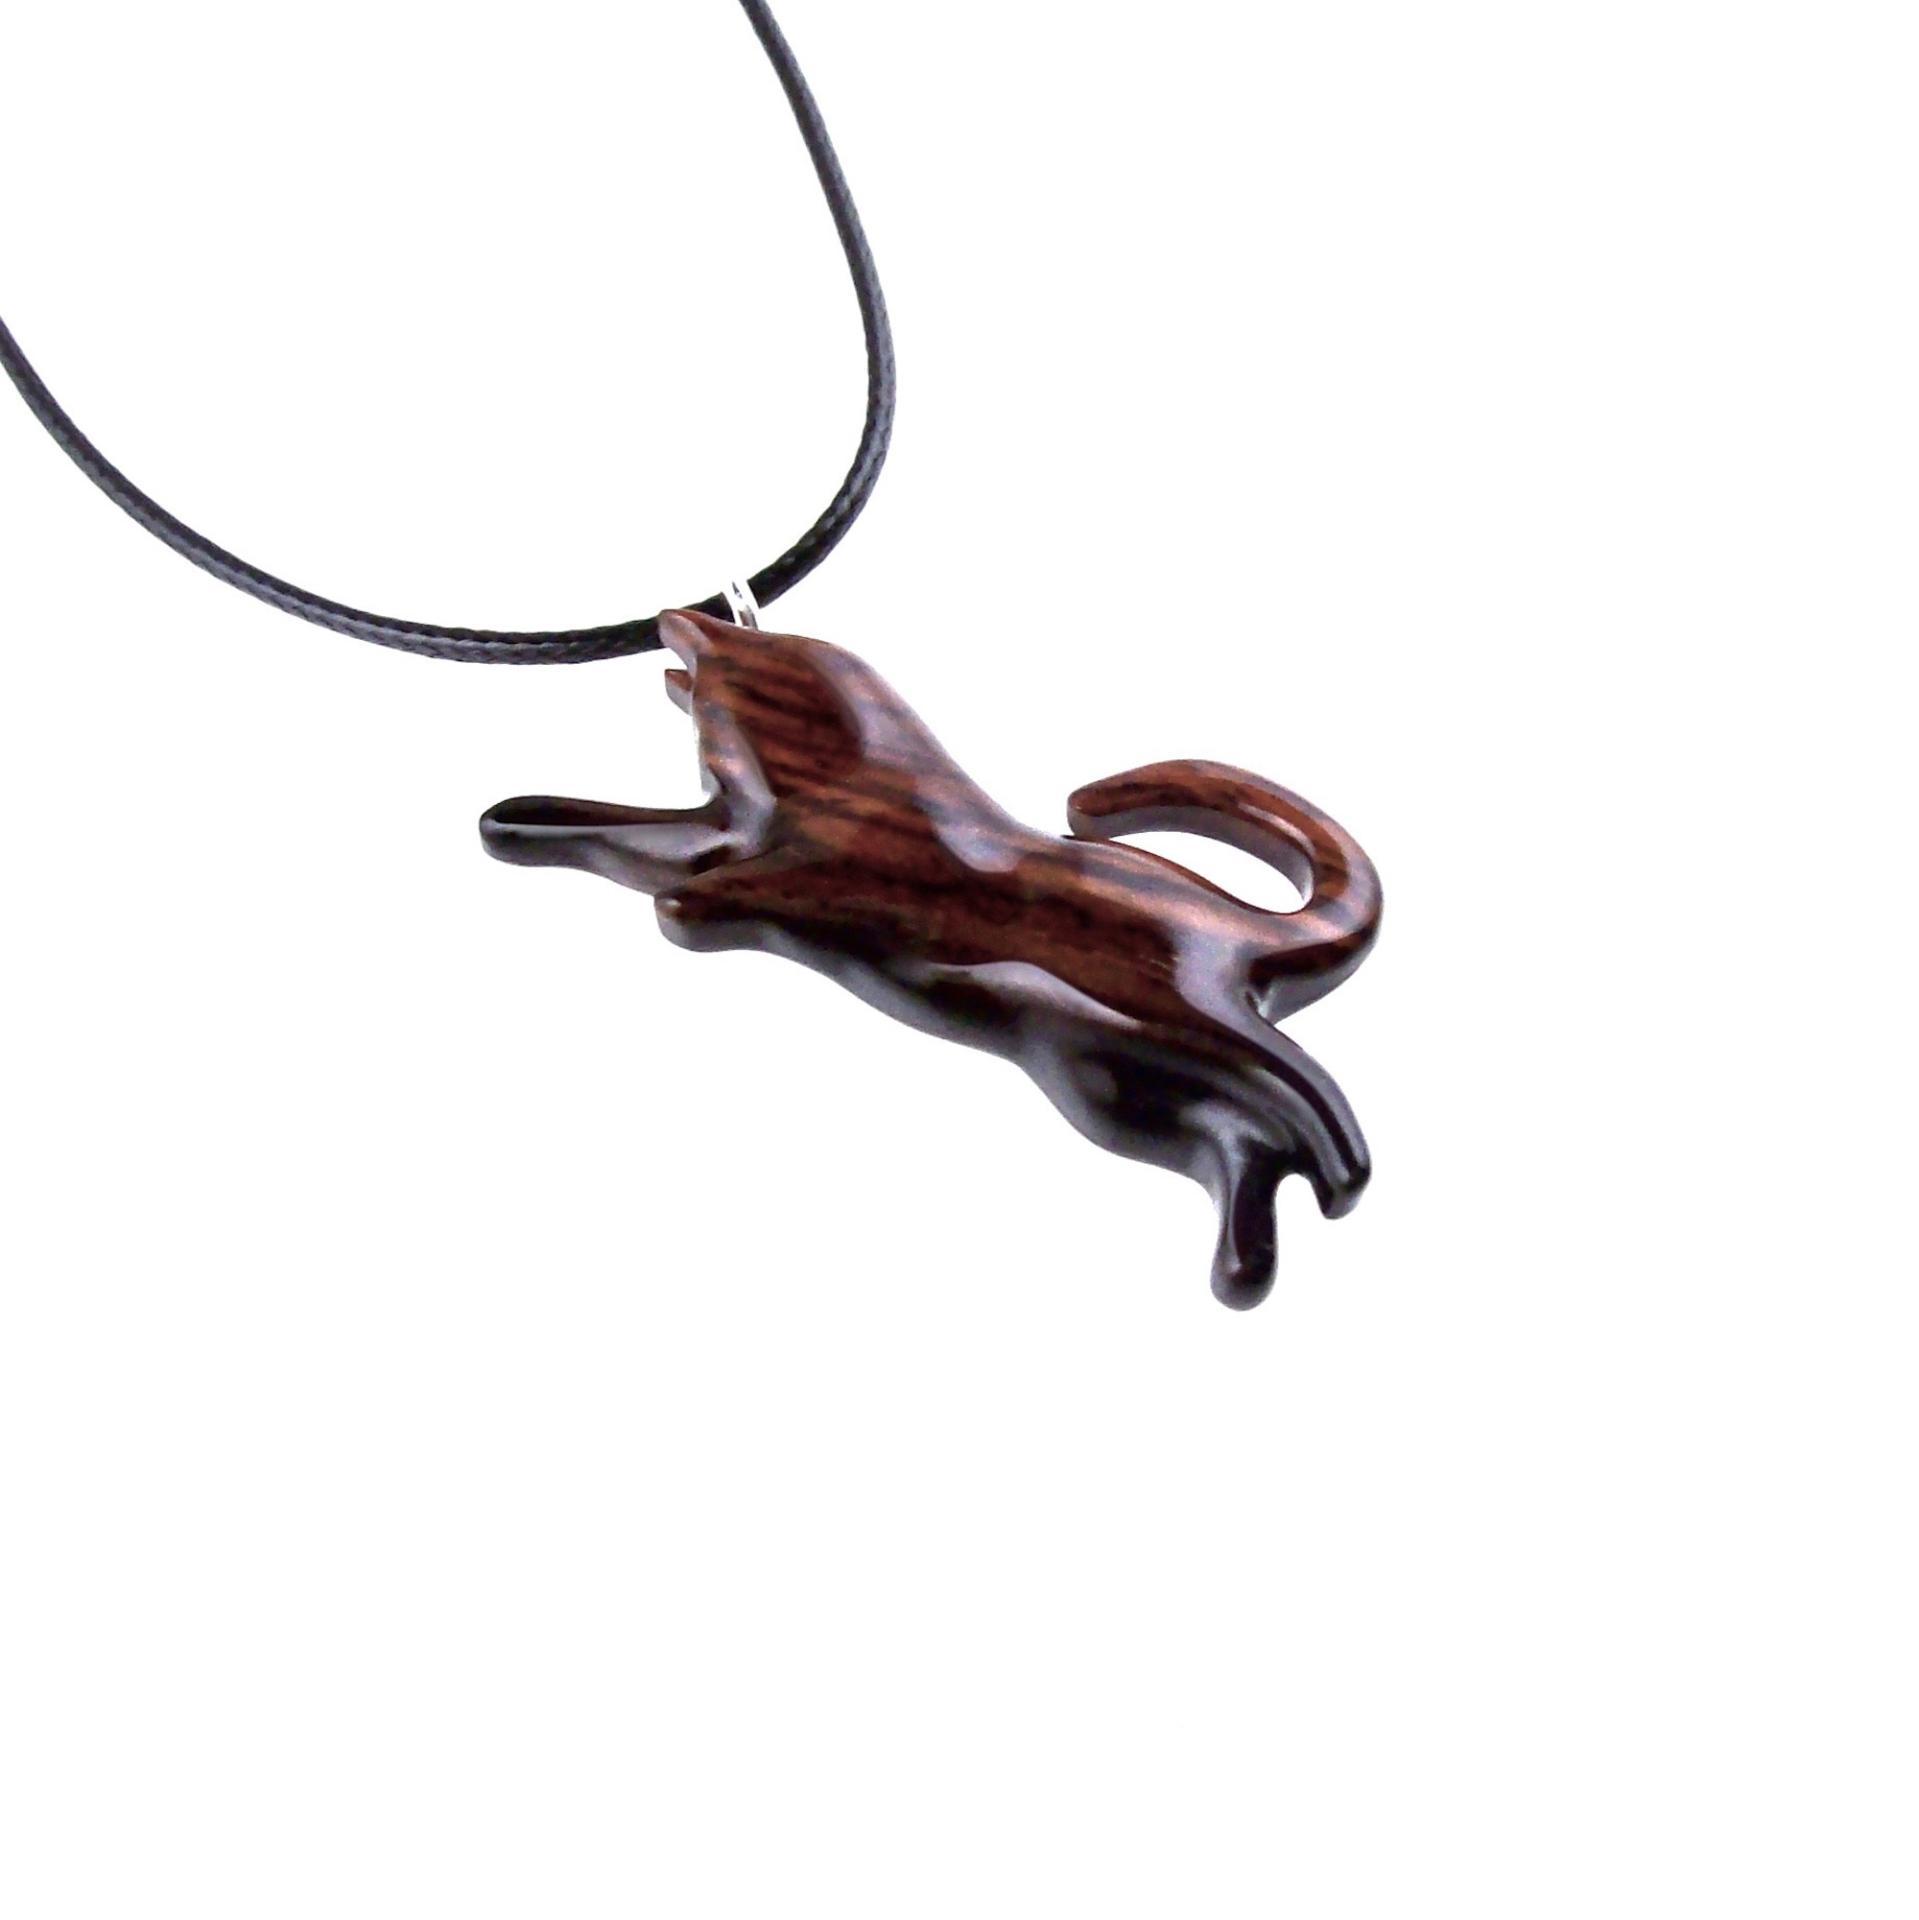 Hand Carved Cat Pendant, Wooden Kitten Necklace, Wood Animal Jewelry, Cat Lover Gift for Him Her